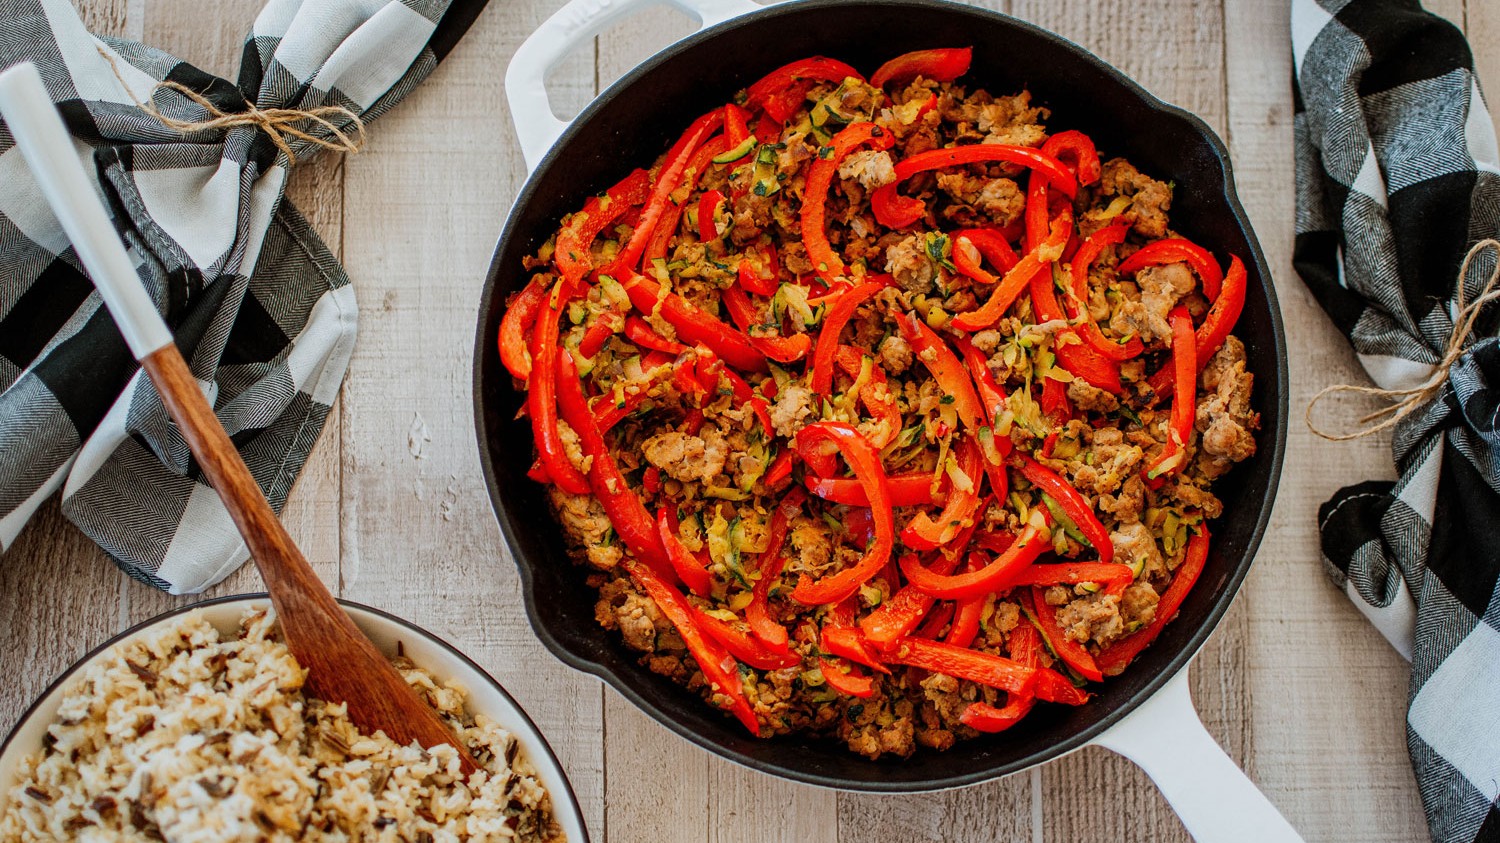 Image of Turkey Zucchini Red Pepper Skillet